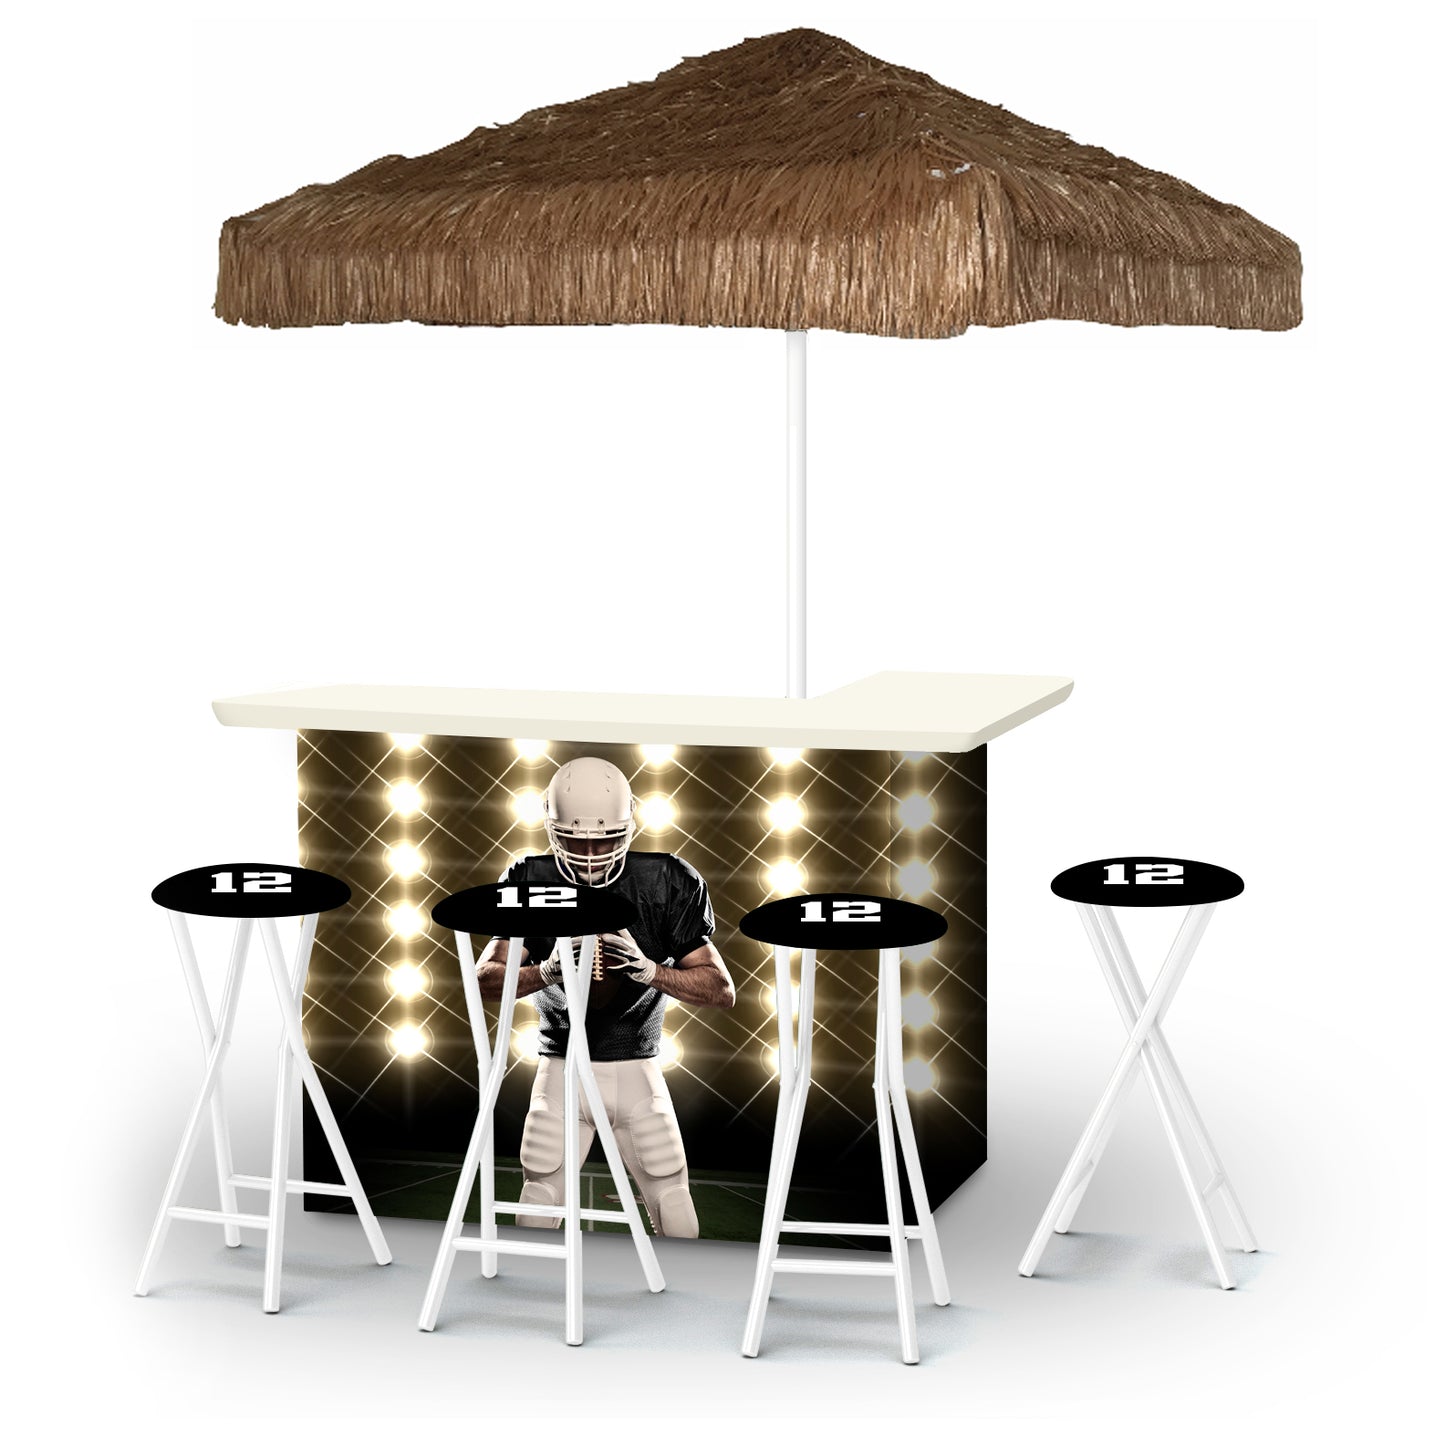 Friday Night Lights Personalize Portable Pop-Up Bar